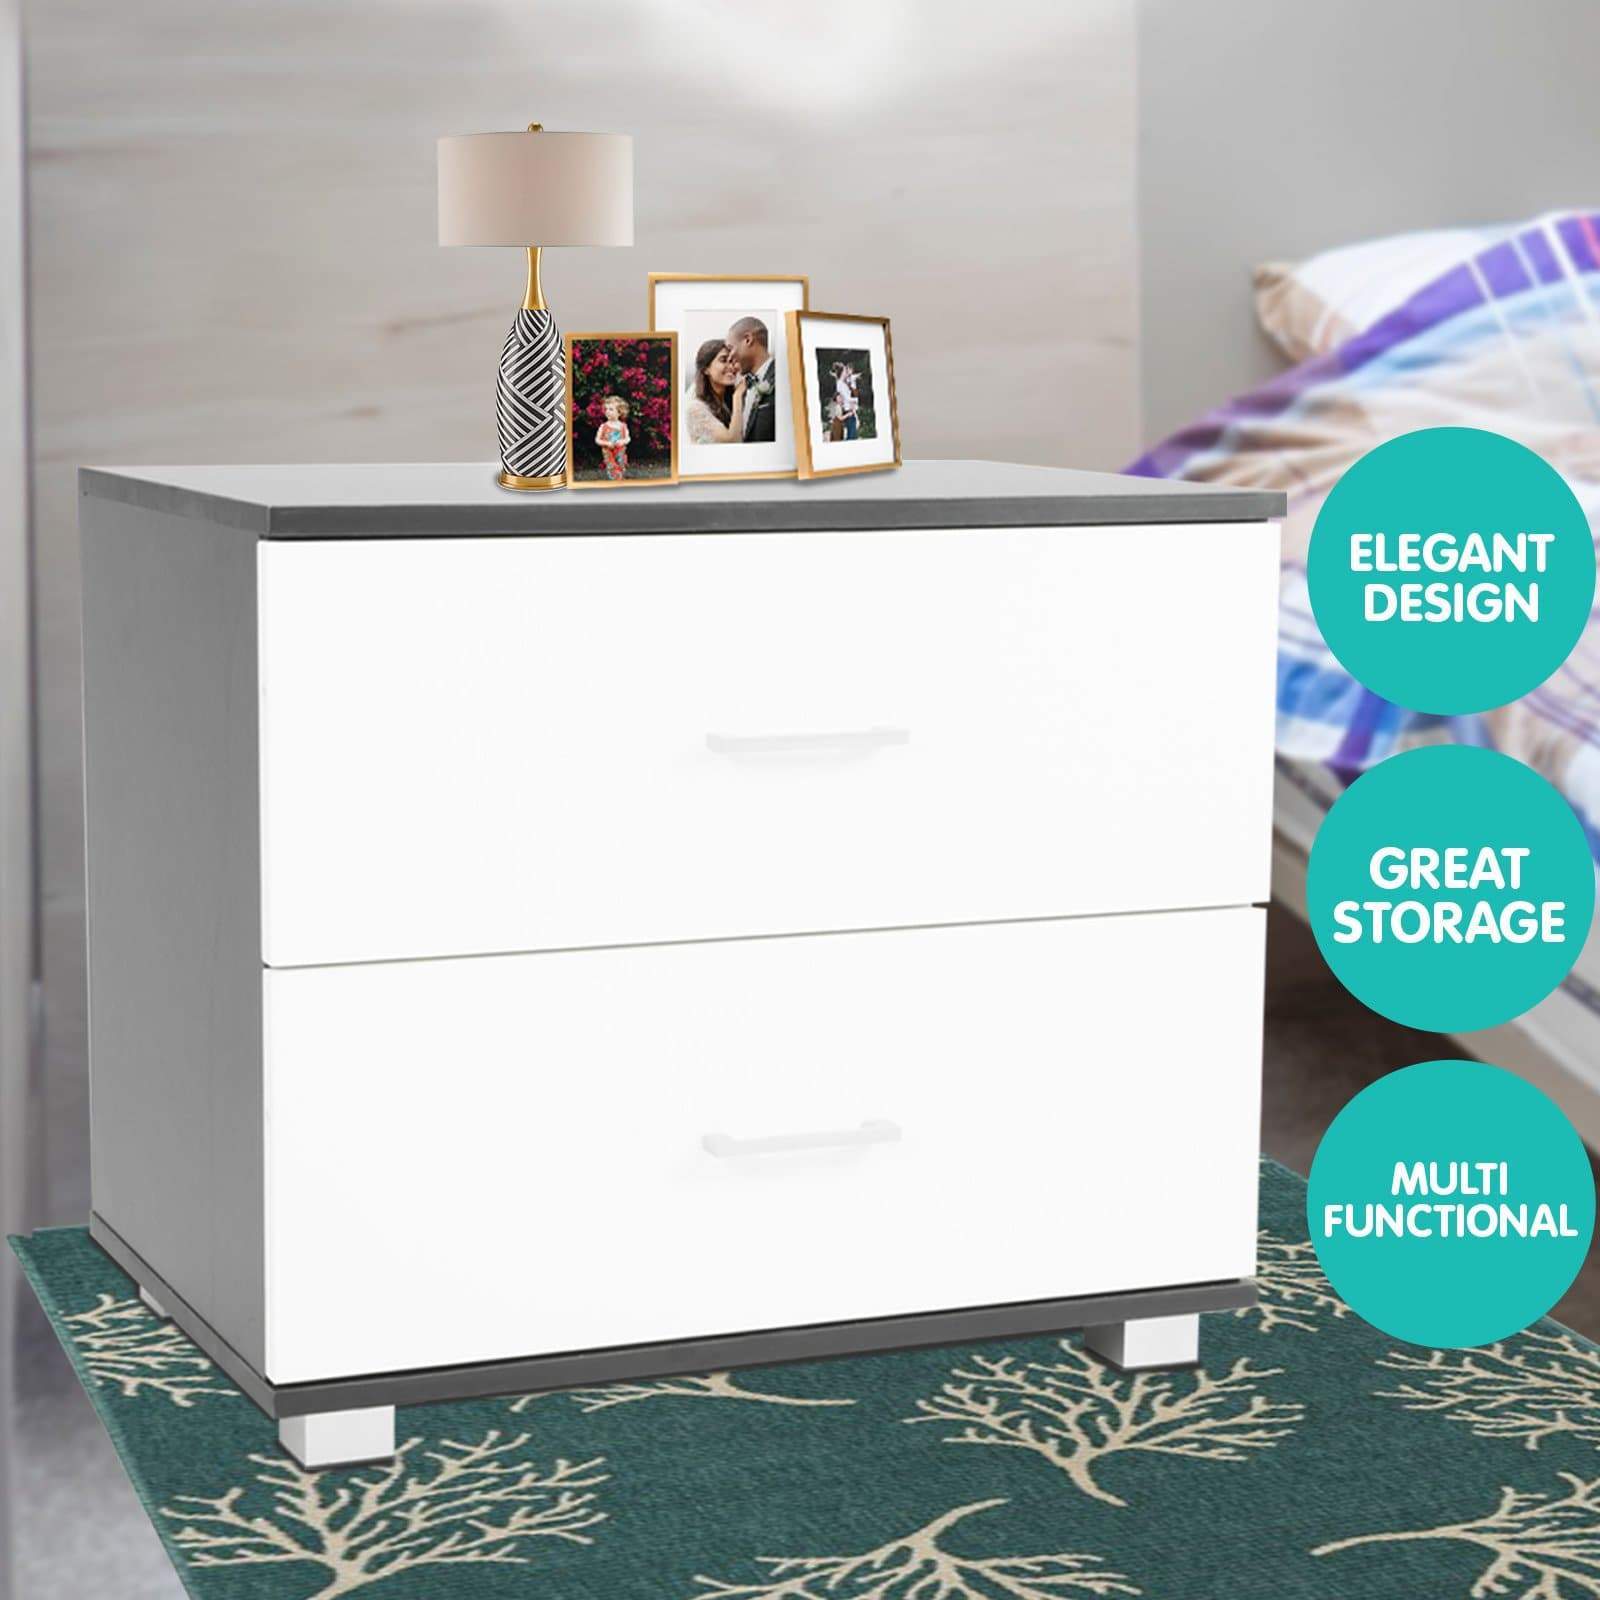 Bedside Table with Drawers MDF - Black White